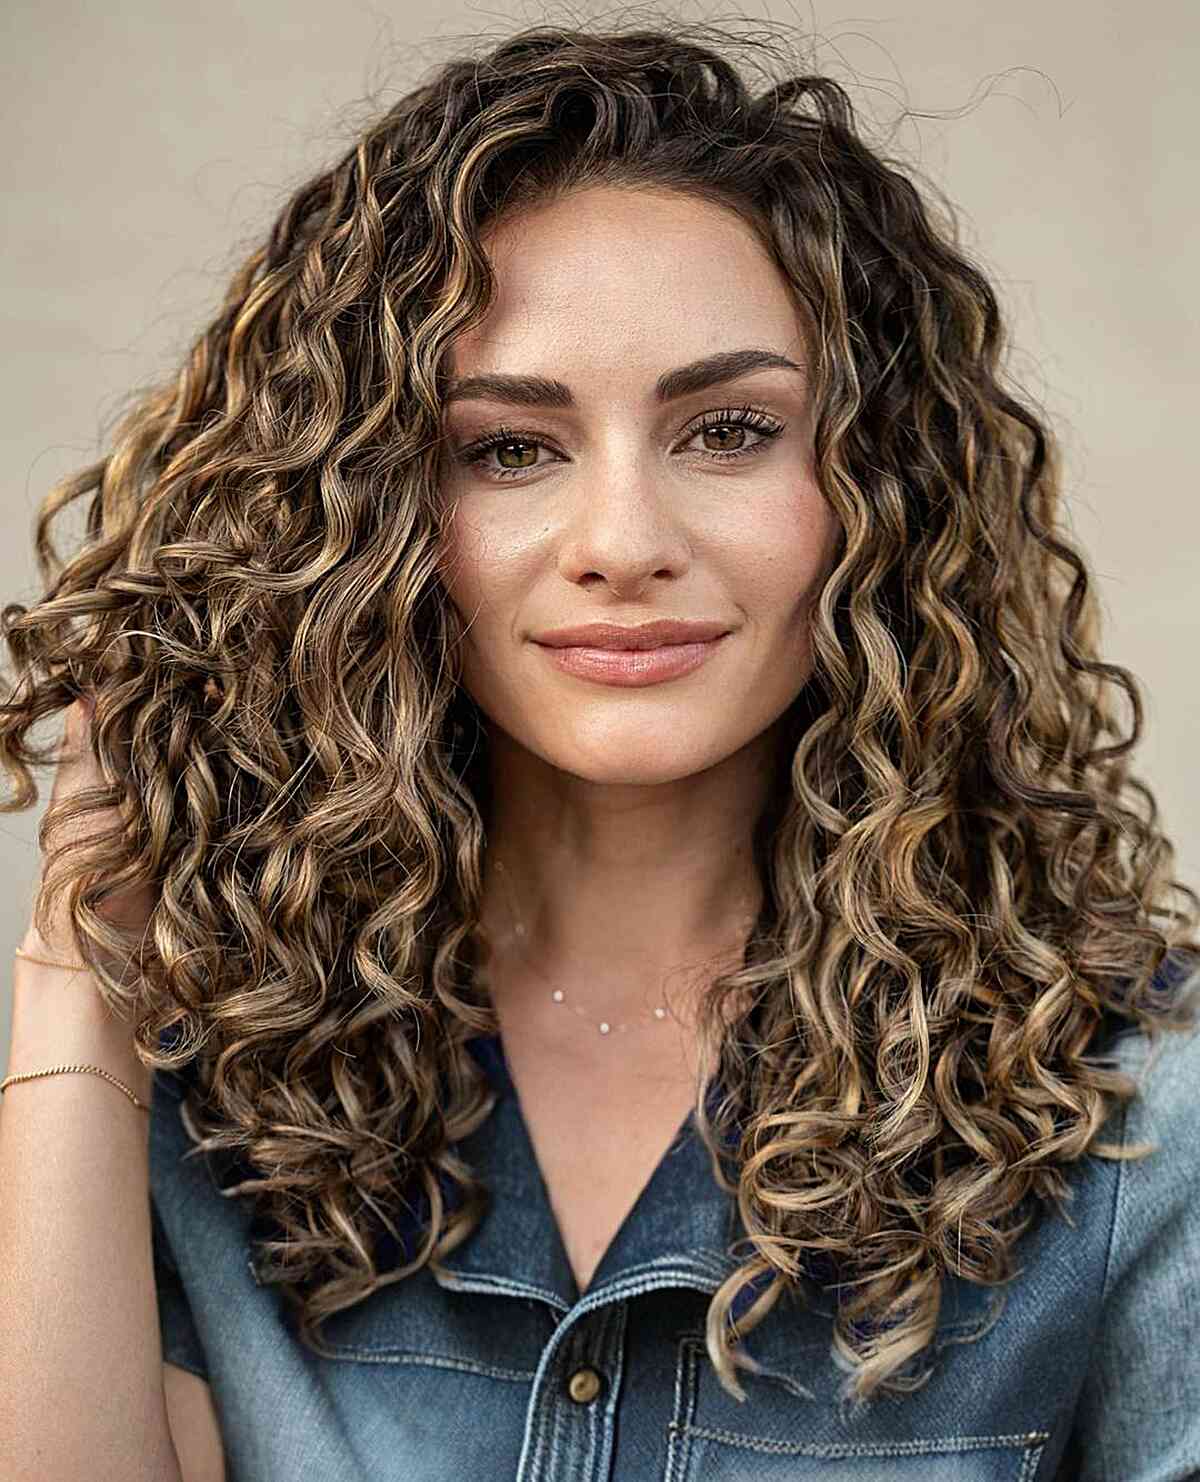 39 Undeniably Pretty Hairstyles For Curly Hair | Colored curly hair,  Beautiful curly hair, Grey curly hair